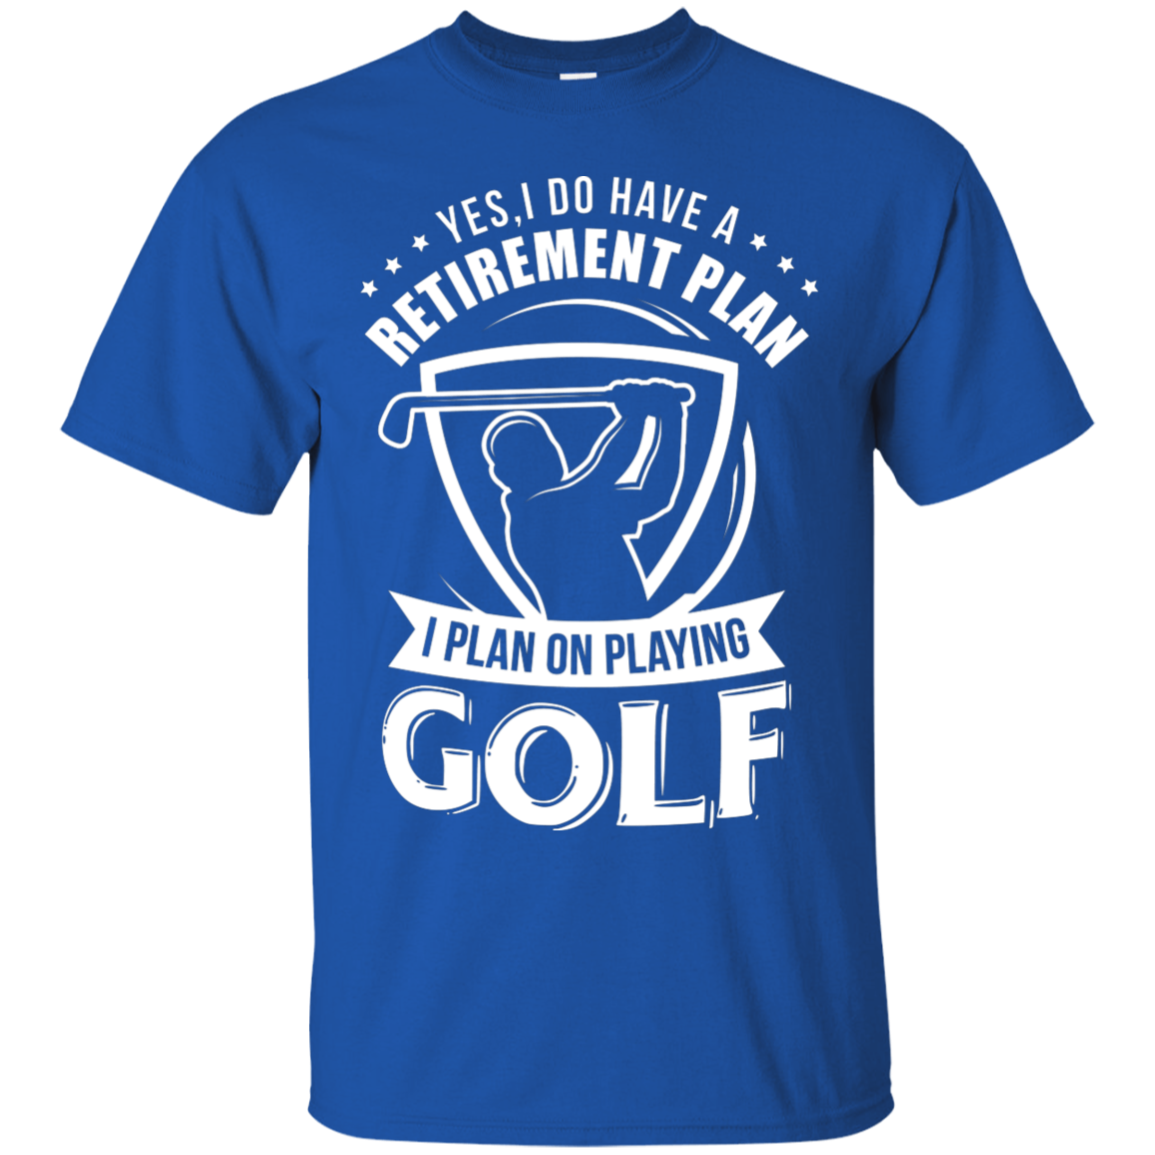 Yes I Do Have A Retirement Plan, I Plan On Playing Golf T-Shirt Apparel - The Beer Lodge